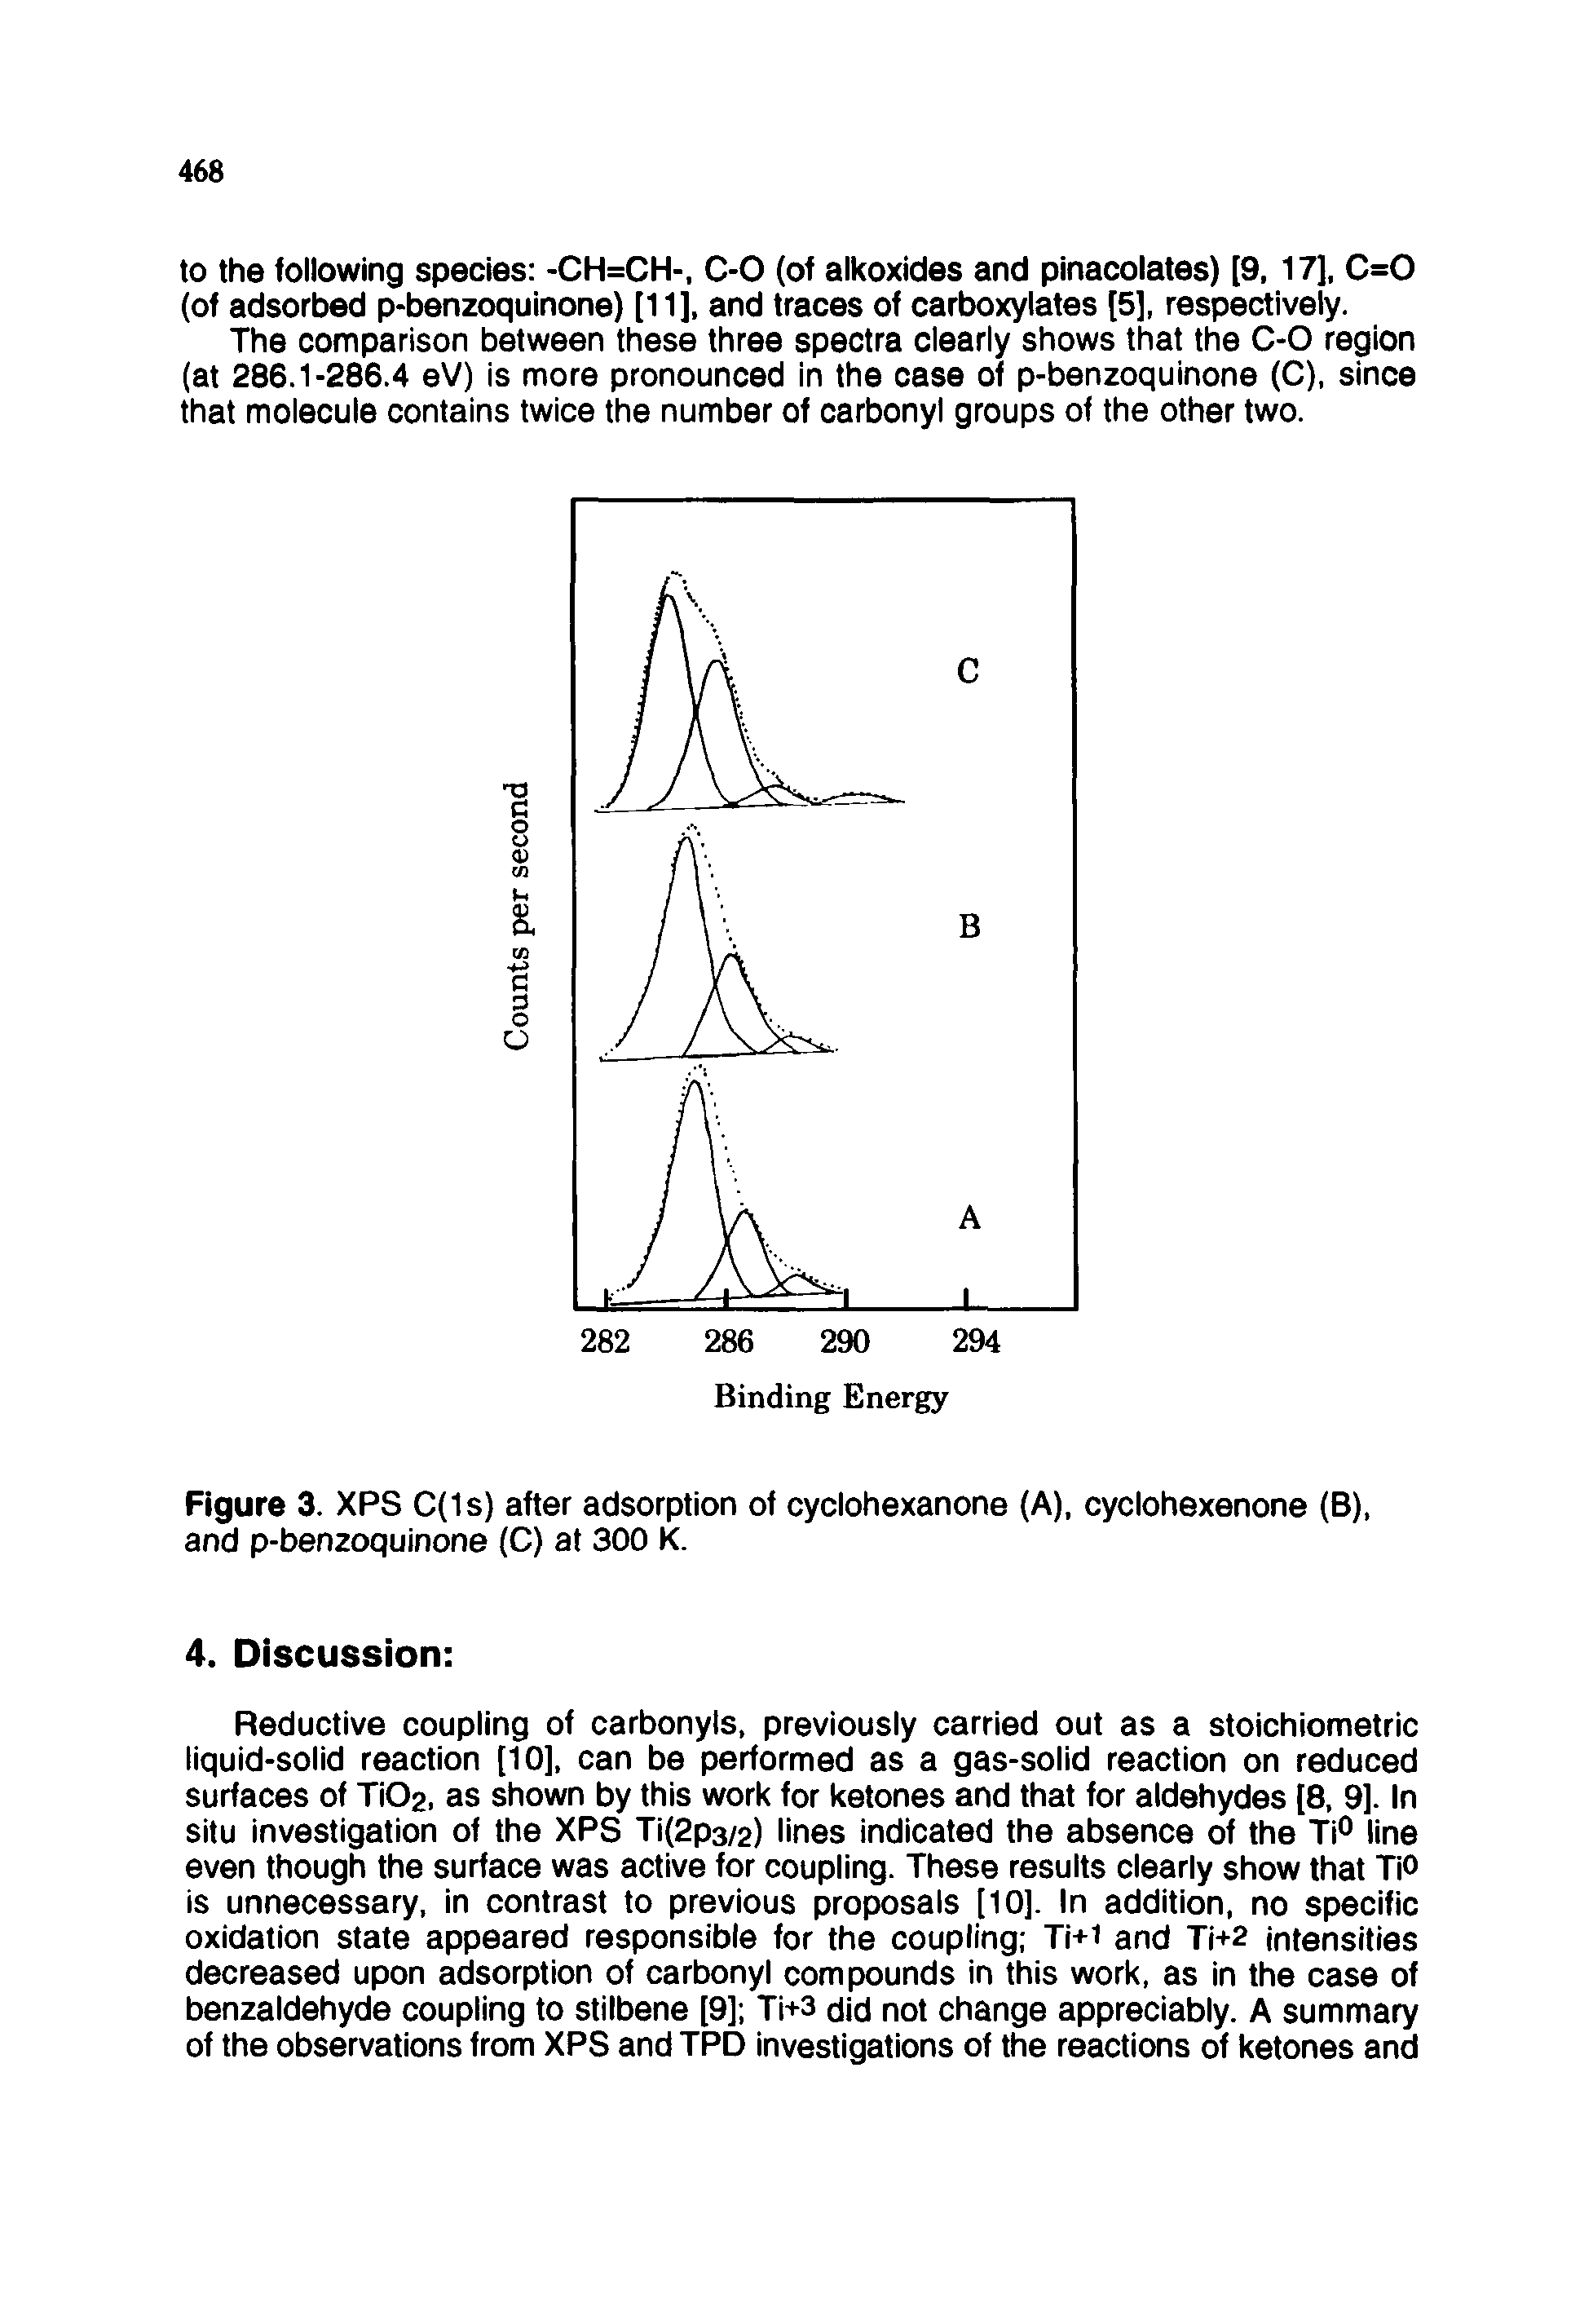 Figure 3. XPS C(1s) after adsorption of cyclohexanone (A), cyclohexenone (B), and p-benzoquinone (C) at 300 K.